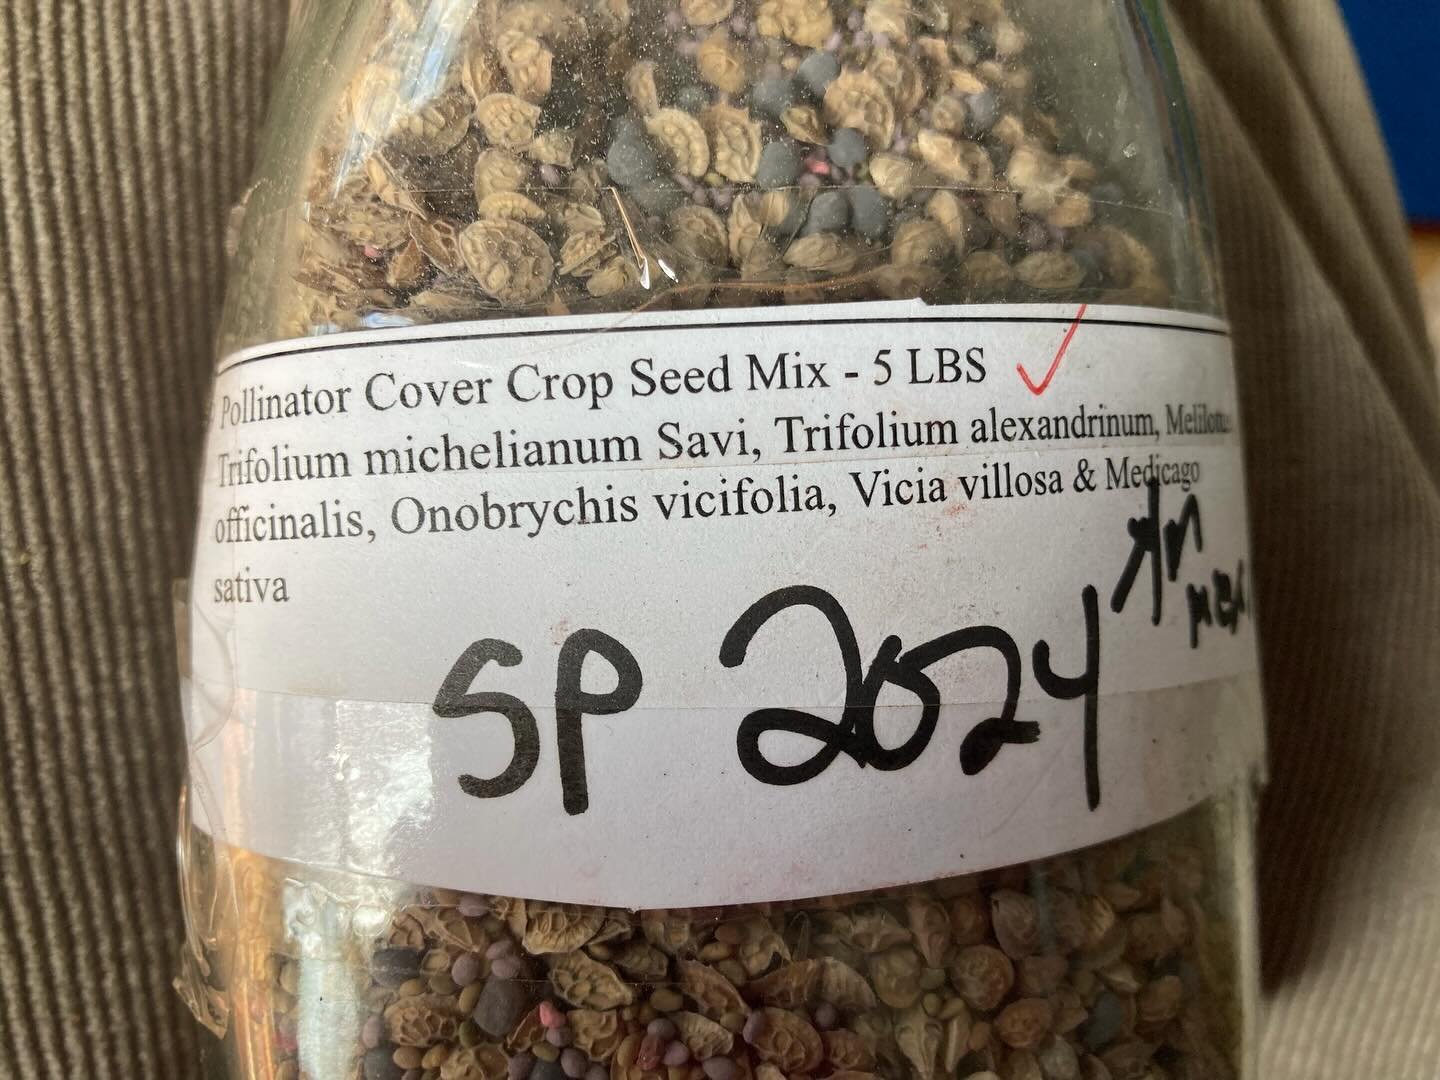 Just call me the seed whisperer! Trying a new mix